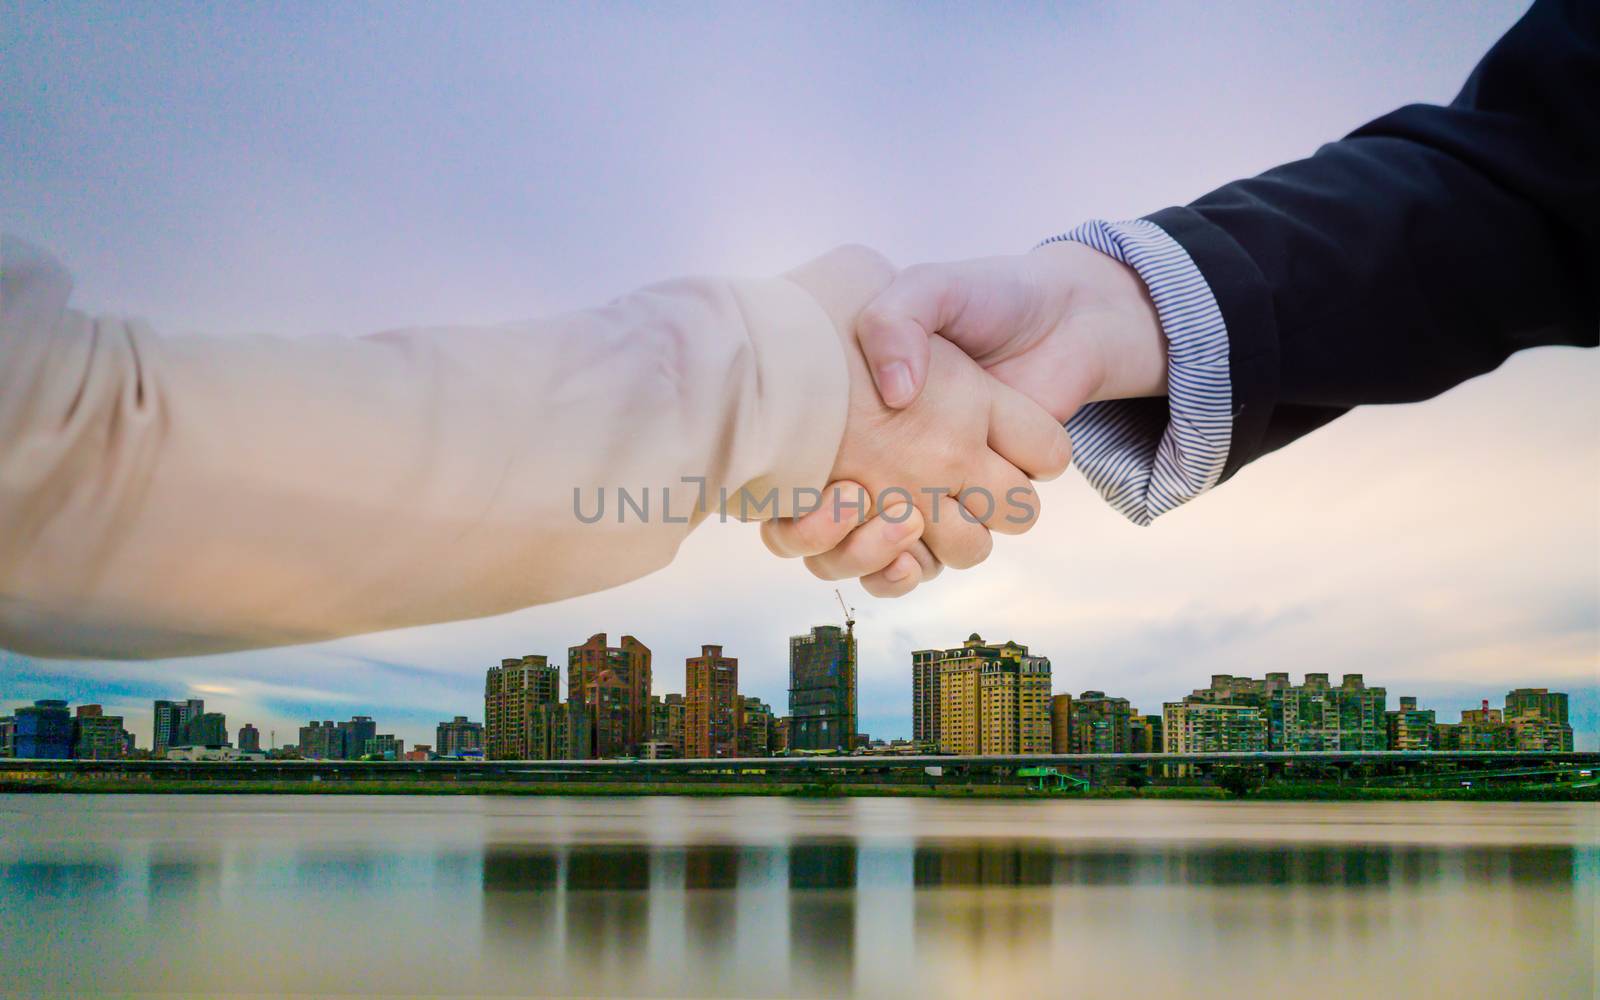 Businesswomen in casual attire shaking hands with cityscape doub by imagesbykenny